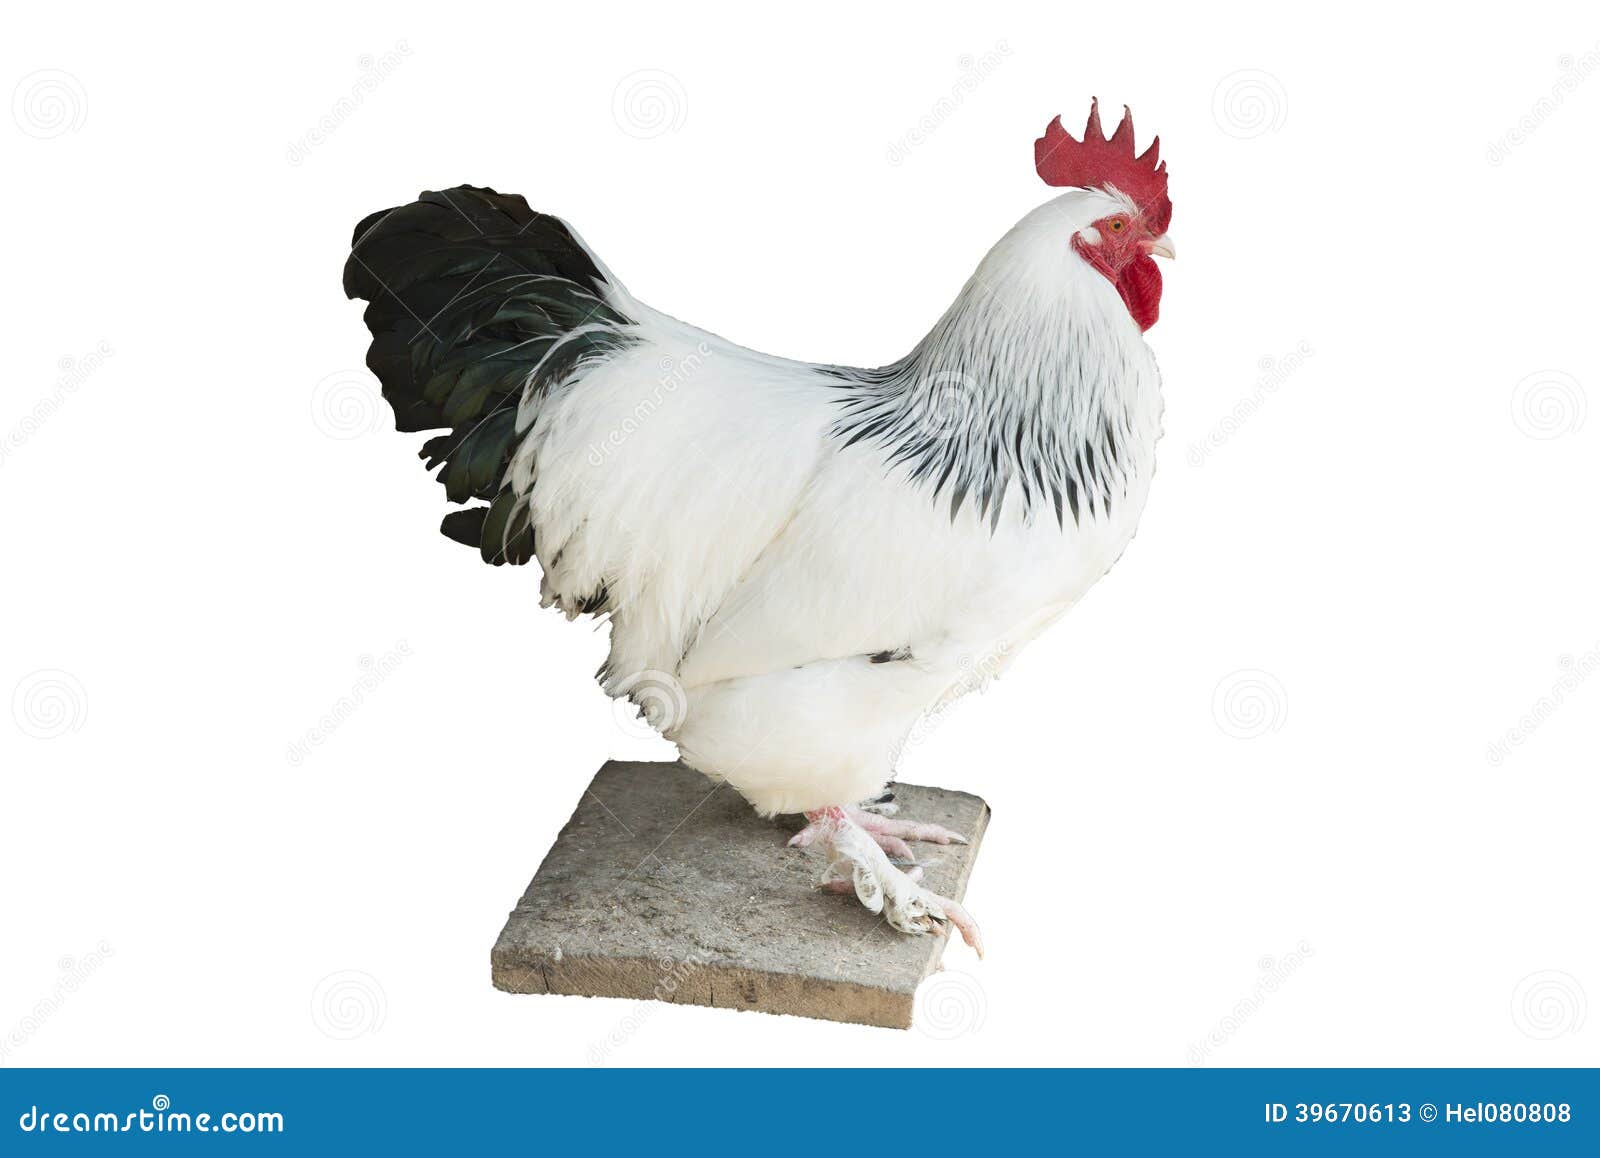 white feathered rooster with black tail and red cockscomb -  on white